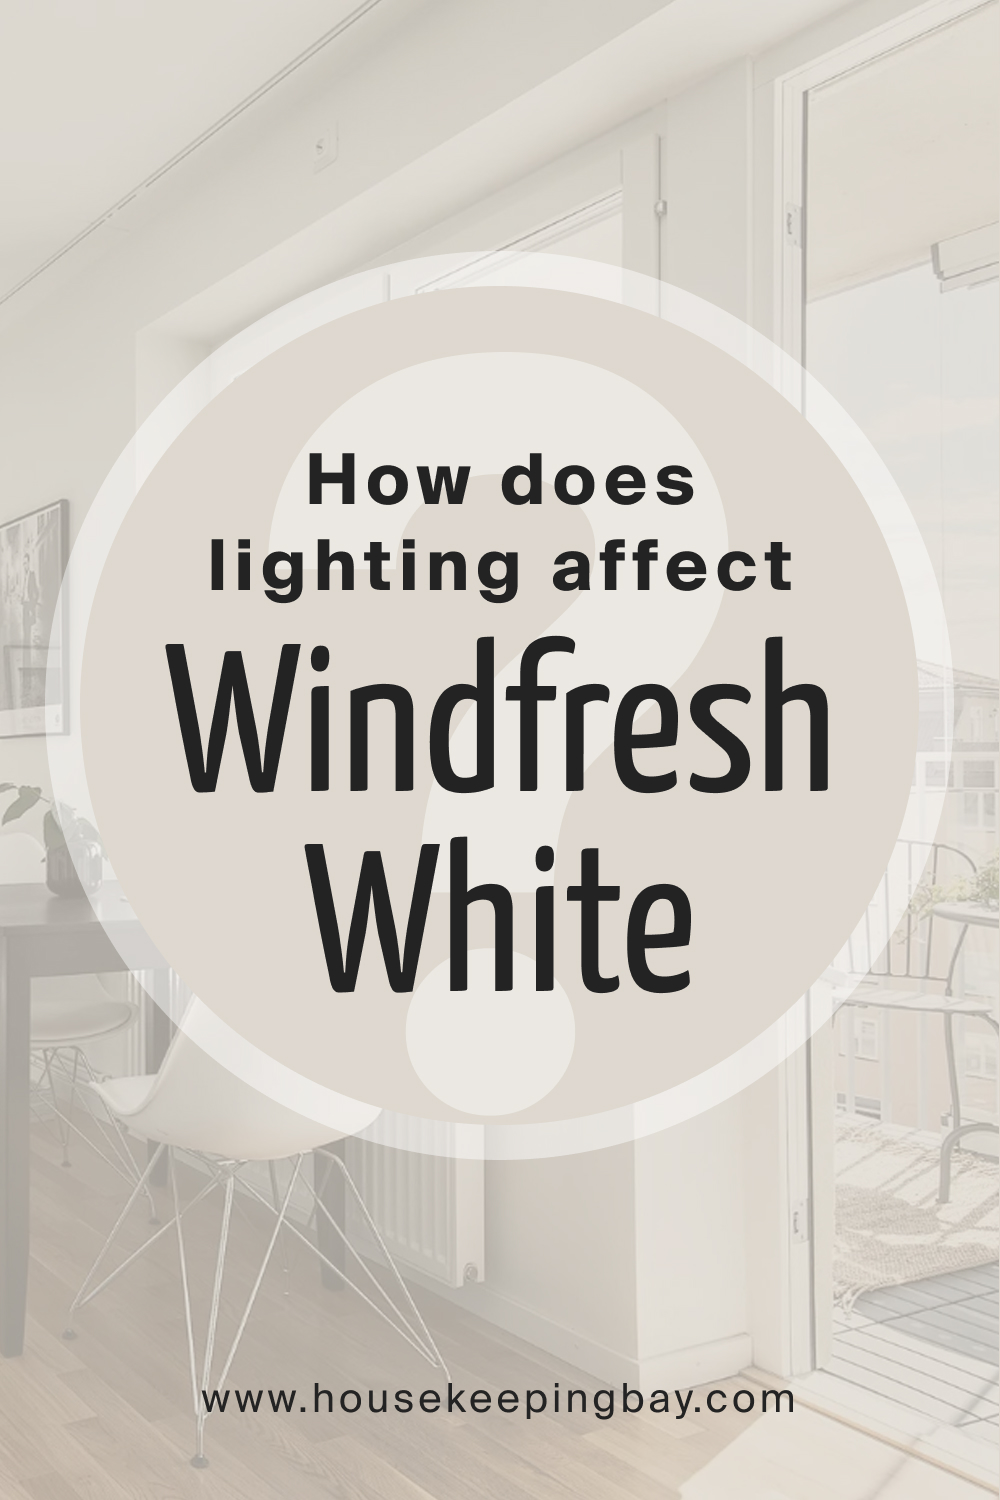 How does lighting affect SW Windfresh White